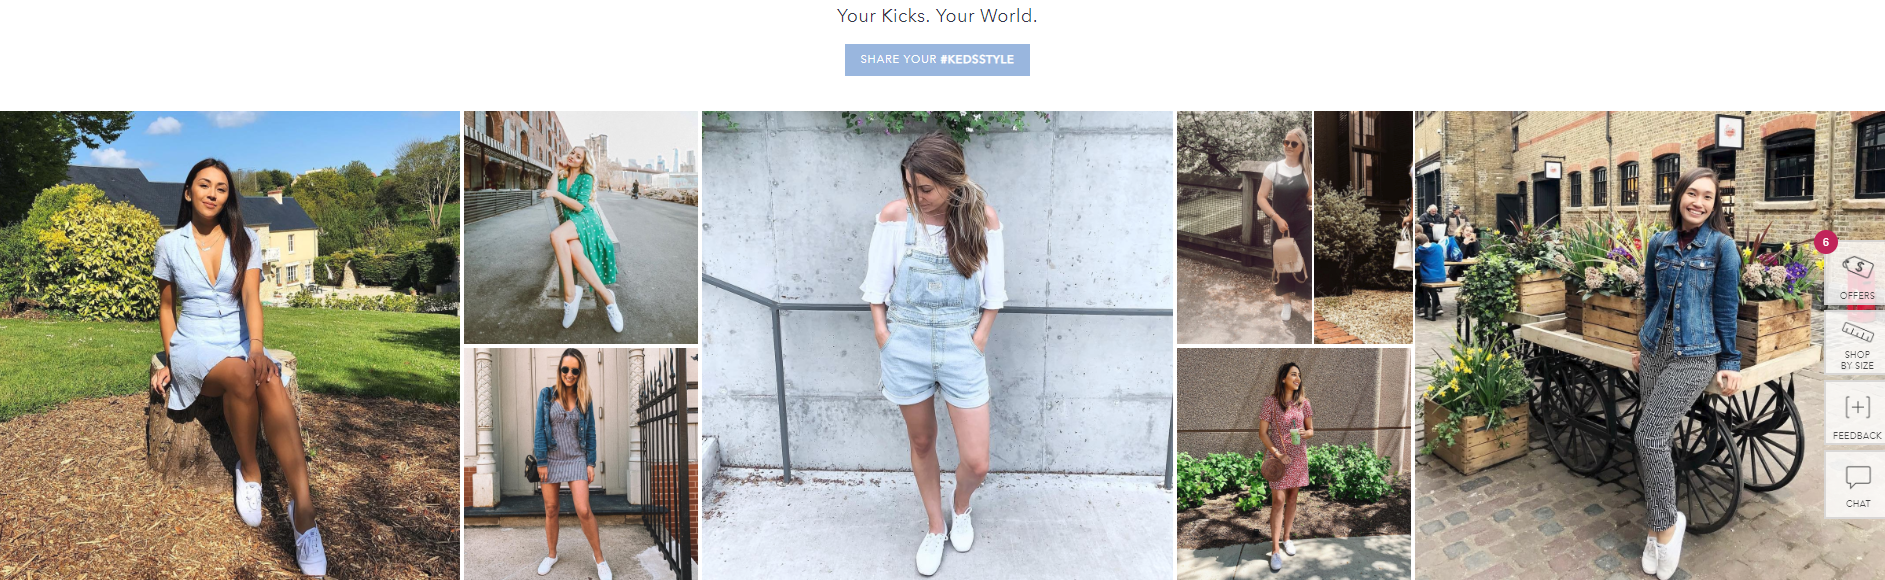 Keds features a lookbook of user-generated content on-site to increase their social media conversions